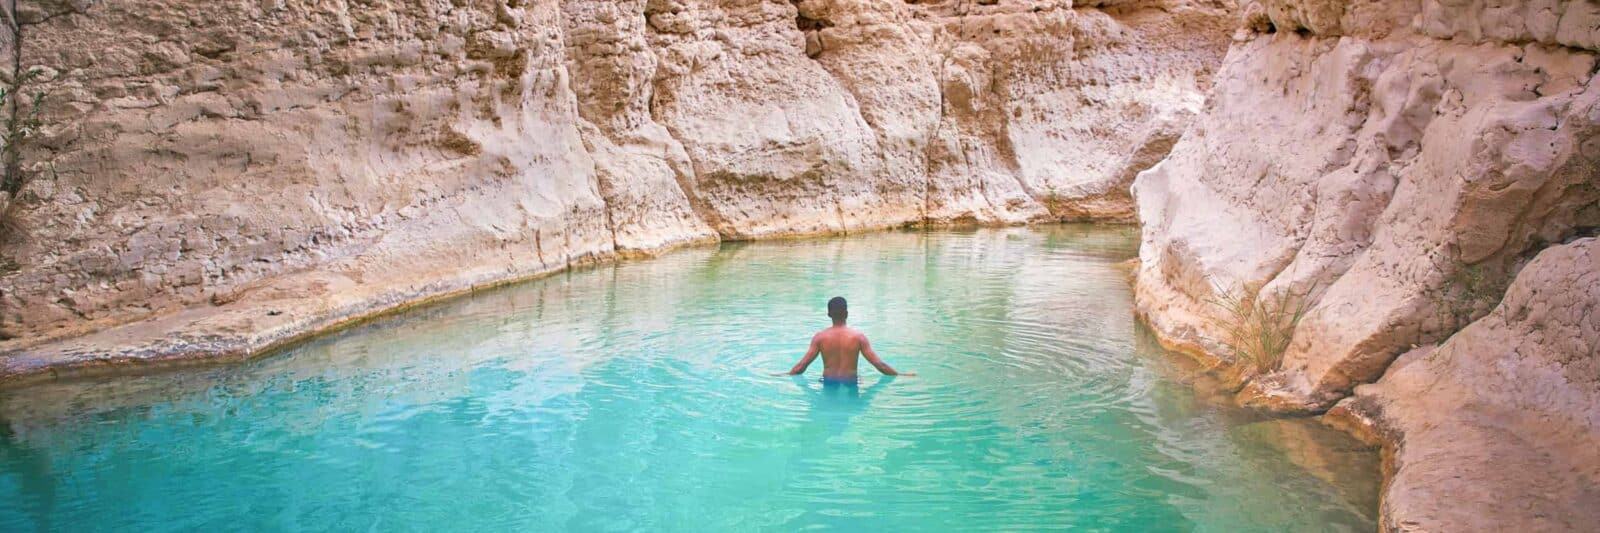 Best time to go to Wadi Shab Oman